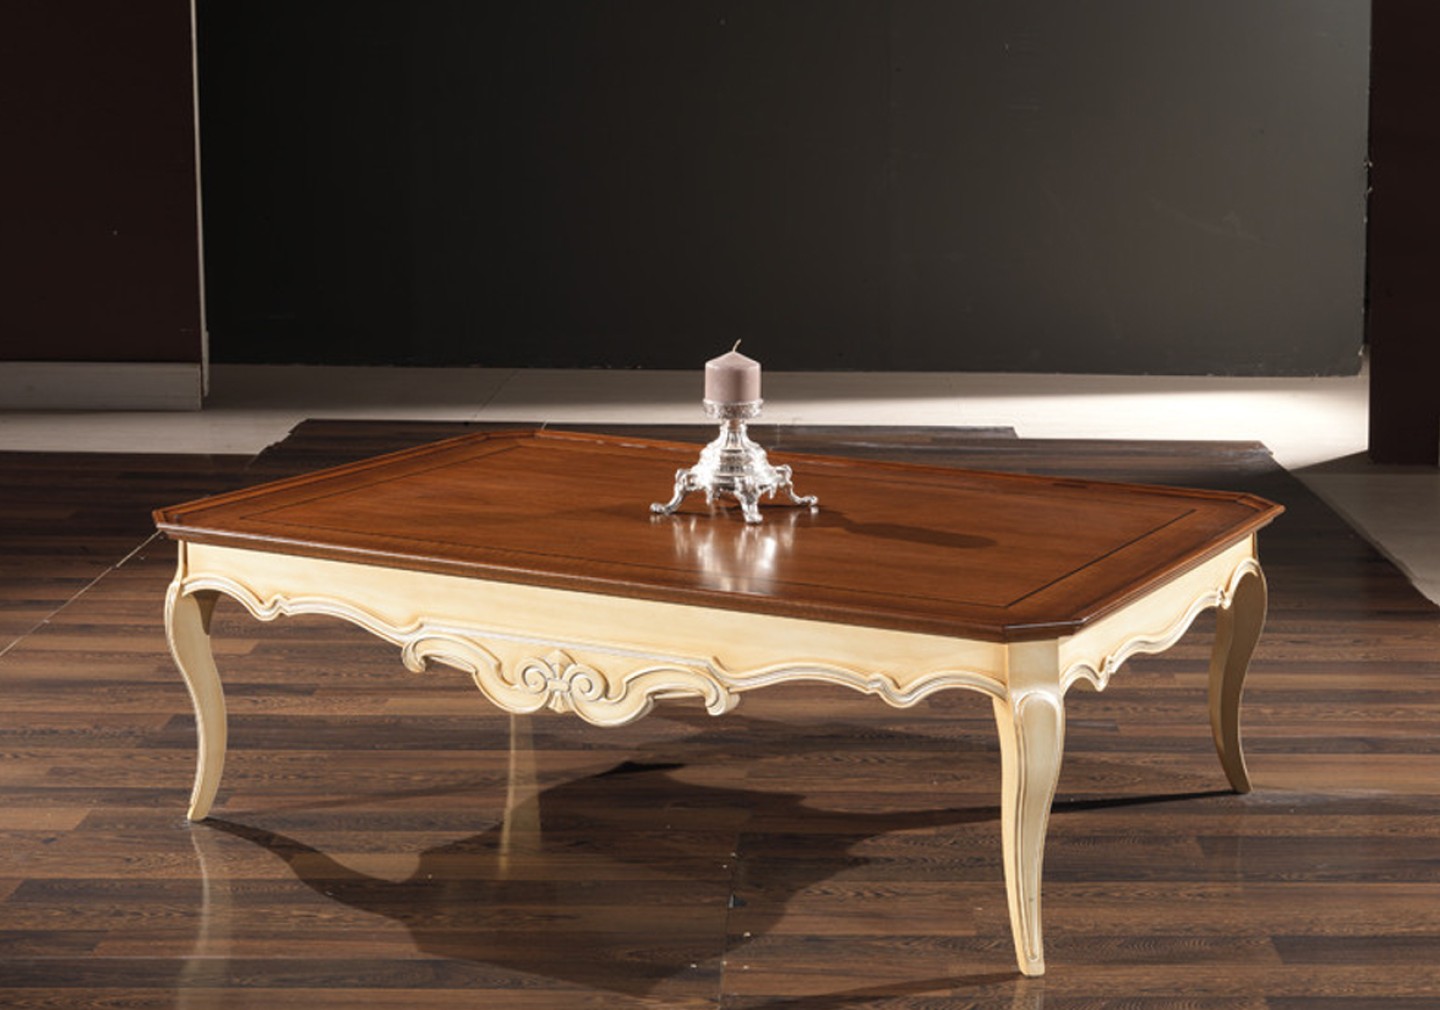 THE LAWRENCE CLASSIC COFFEE TABLE